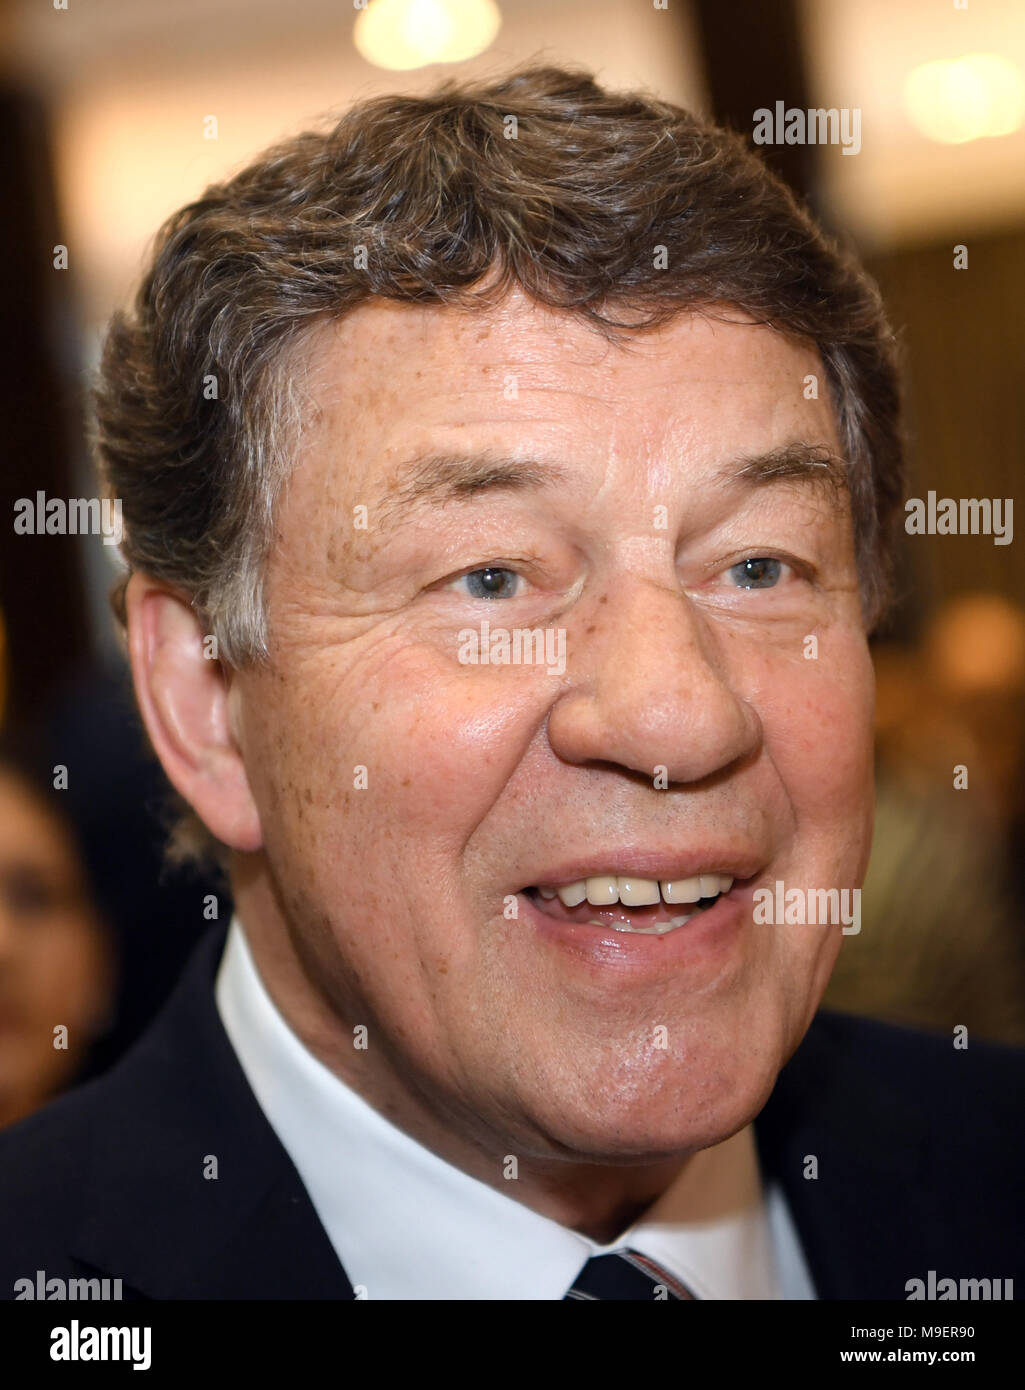 19 March 2018, Germany, Neu-Isenburg: Otto Rehhagel, former Bundesliga trainer and trainer of the Greek national team, attends a gala event of the German Football Association (DFB). Photo: Arne Dedert/dpa Stock Photo